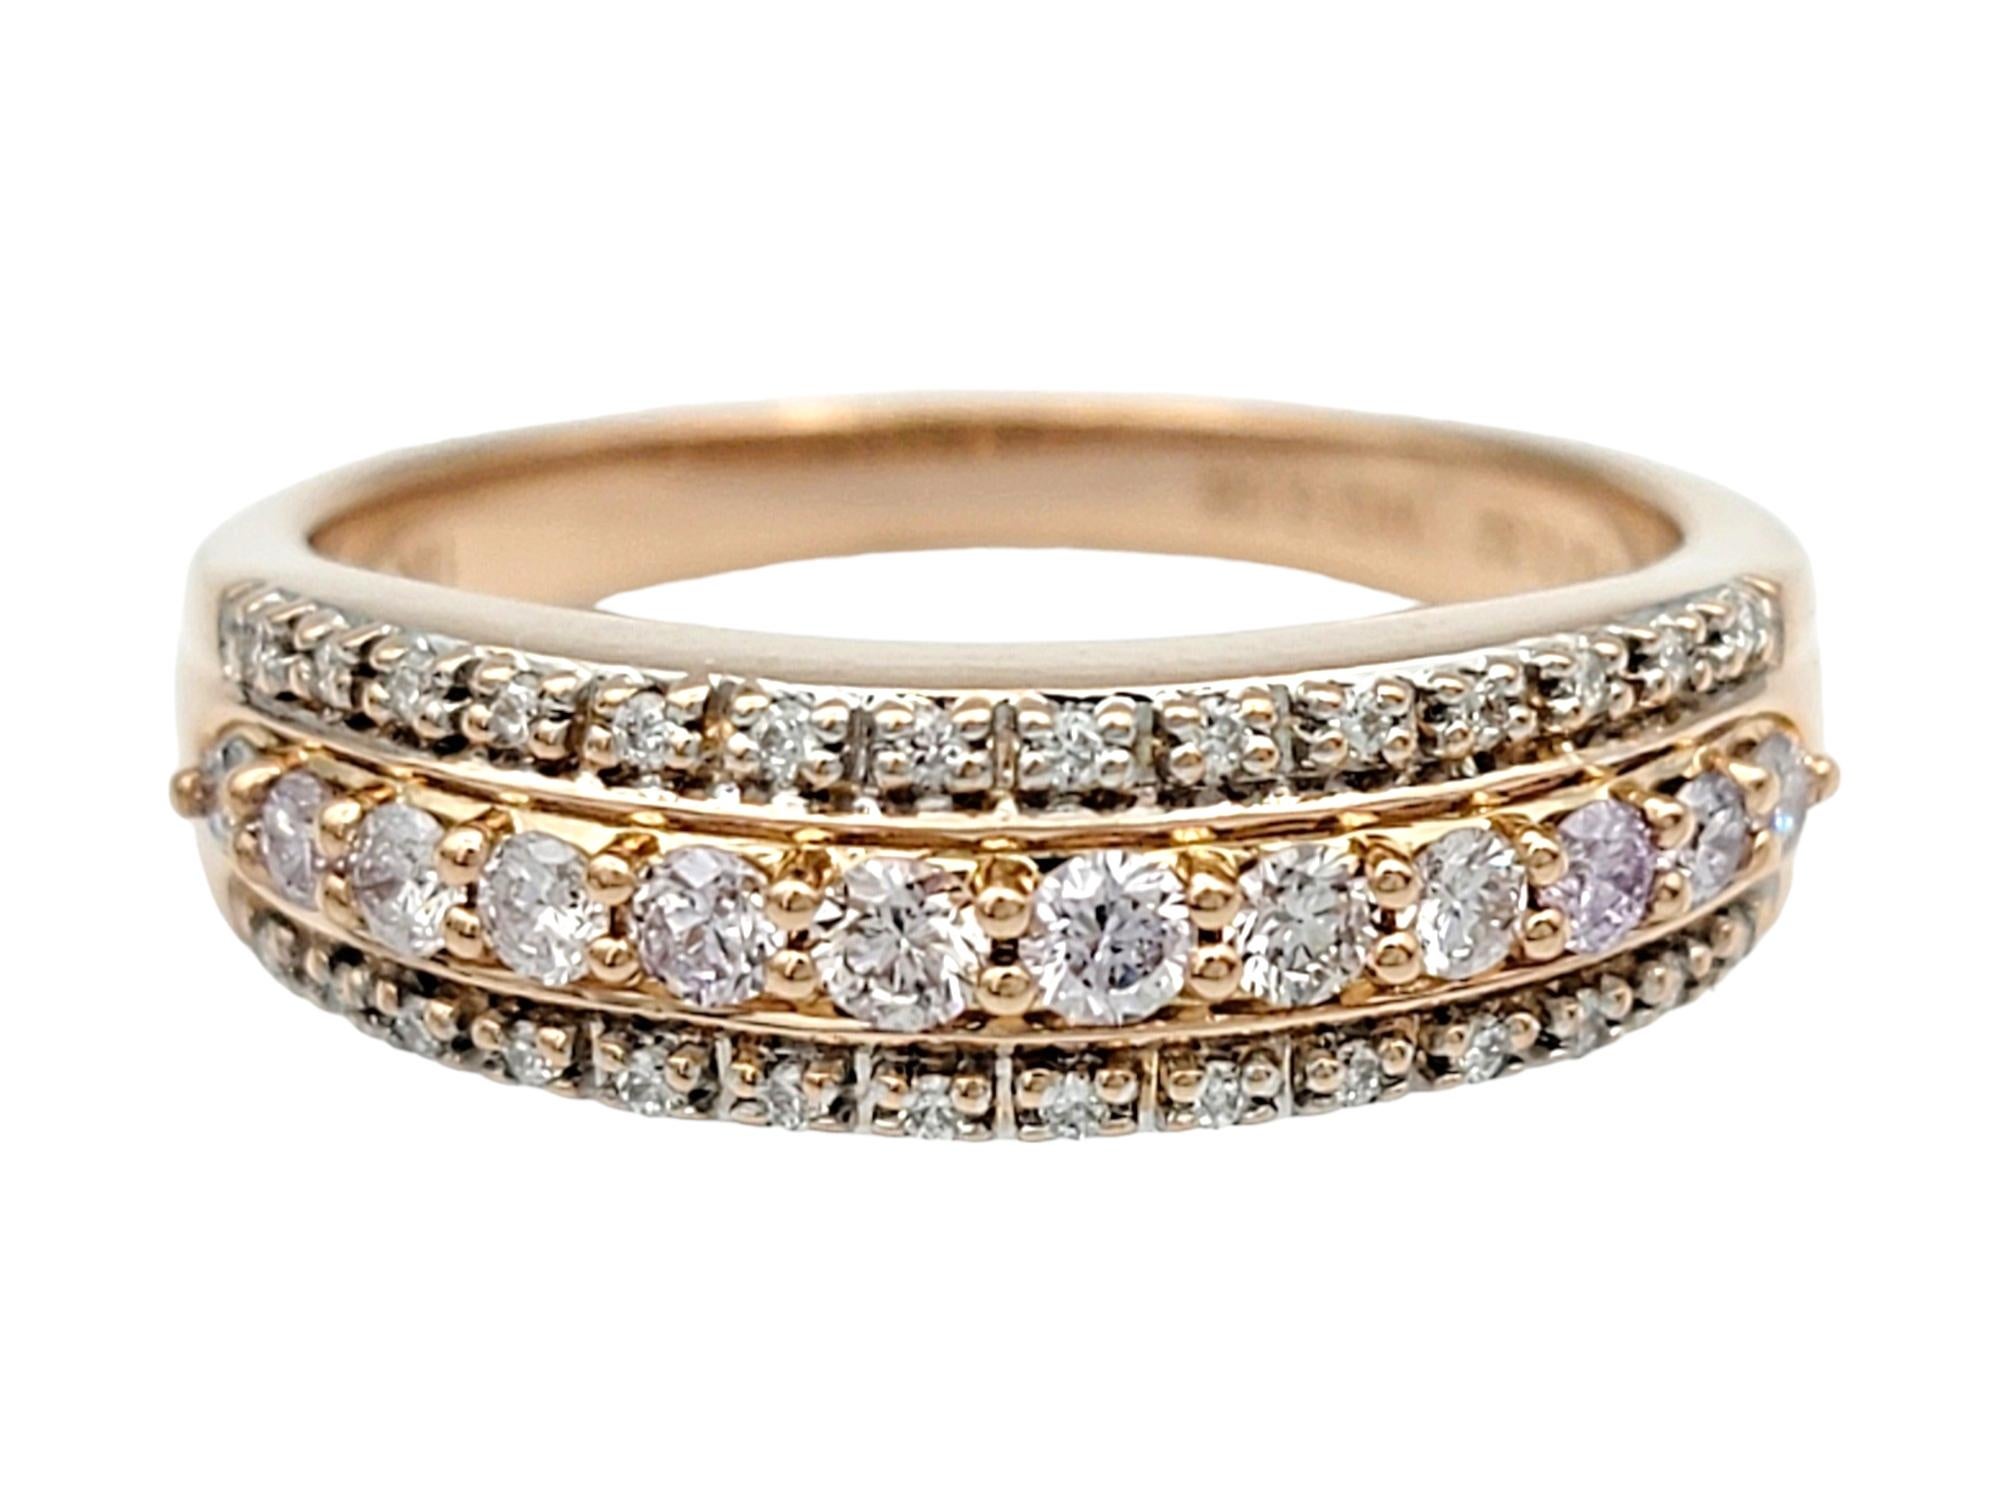 Ring Size: 7

This exquisite three-row diamond band ring is a true symbol of elegance and sophistication. Crafted in 18 karat rose gold, it features a captivating design with three rows of dazzling diamonds. The center row is adorned with larger